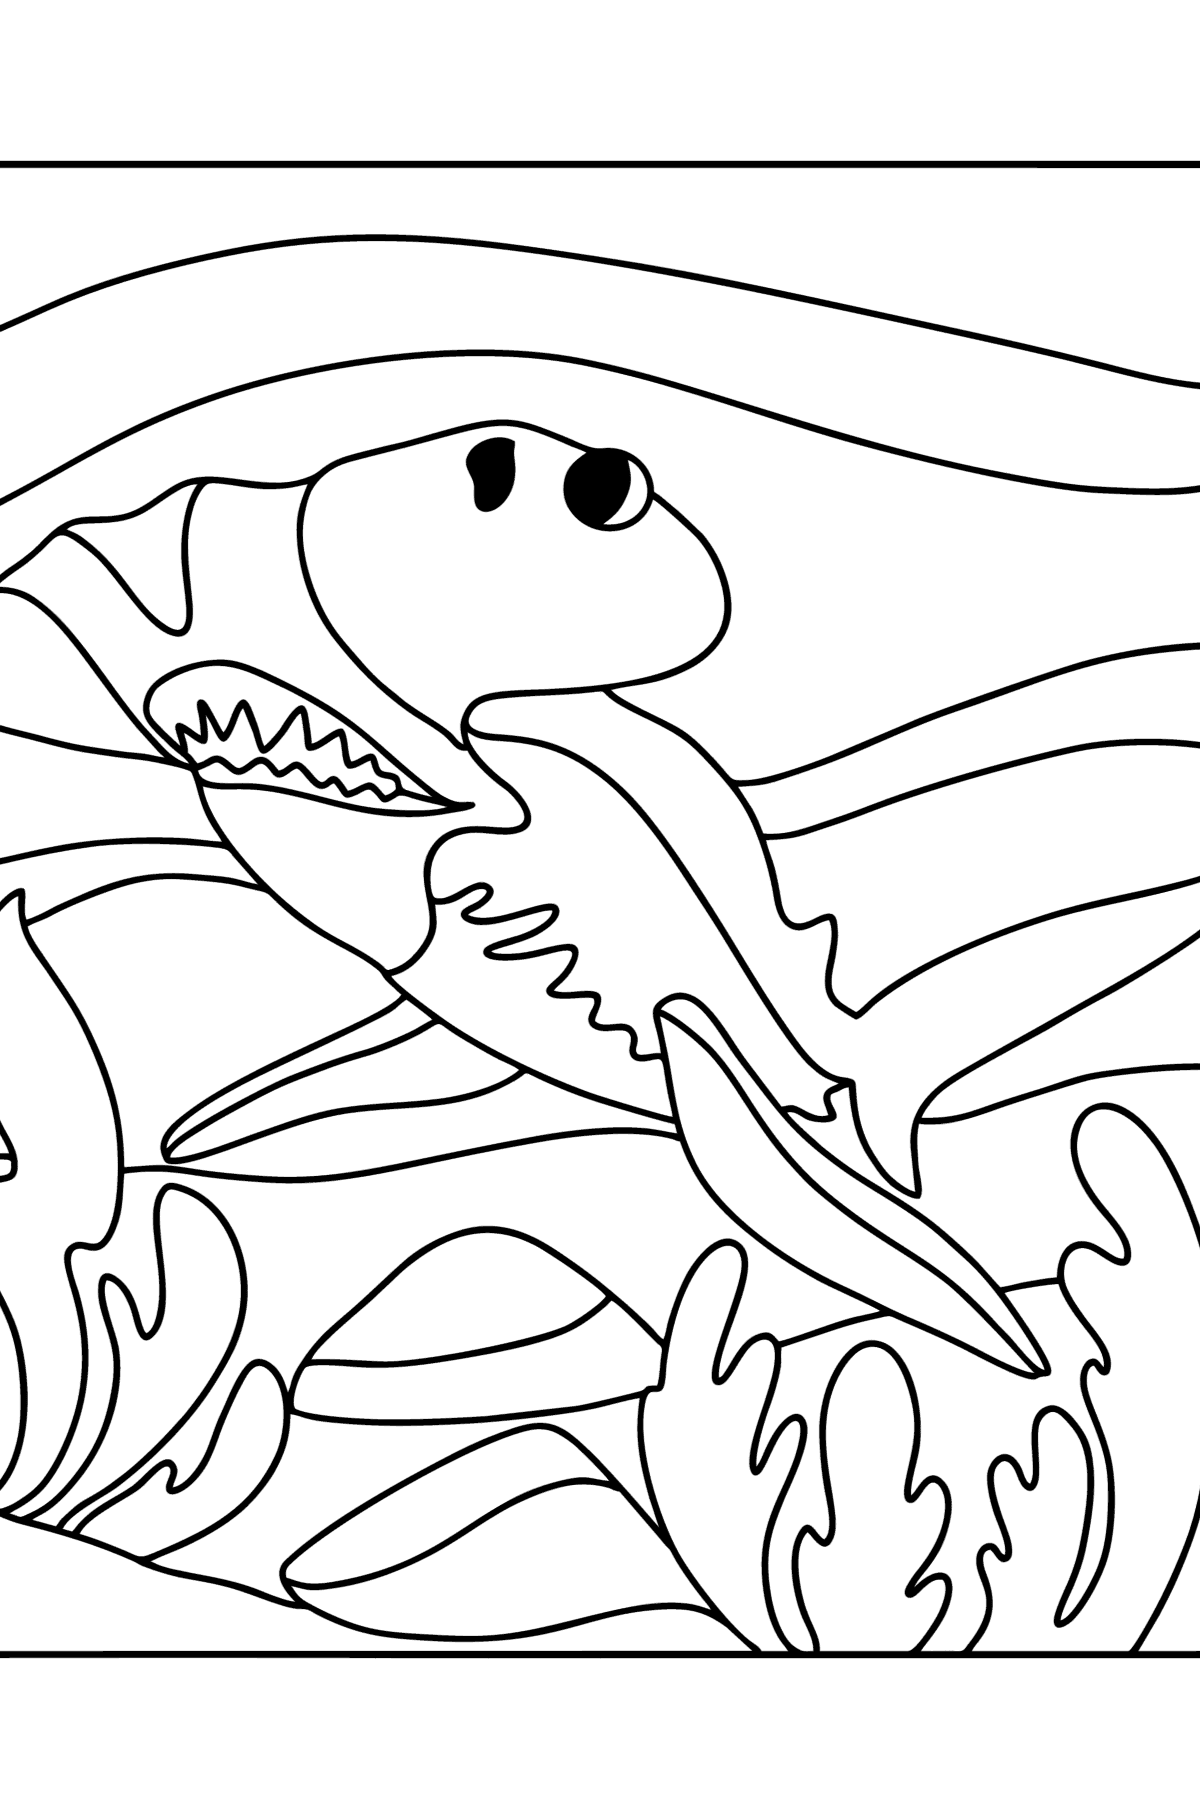 Hammerhead shark coloring page - Coloring Pages for Kids